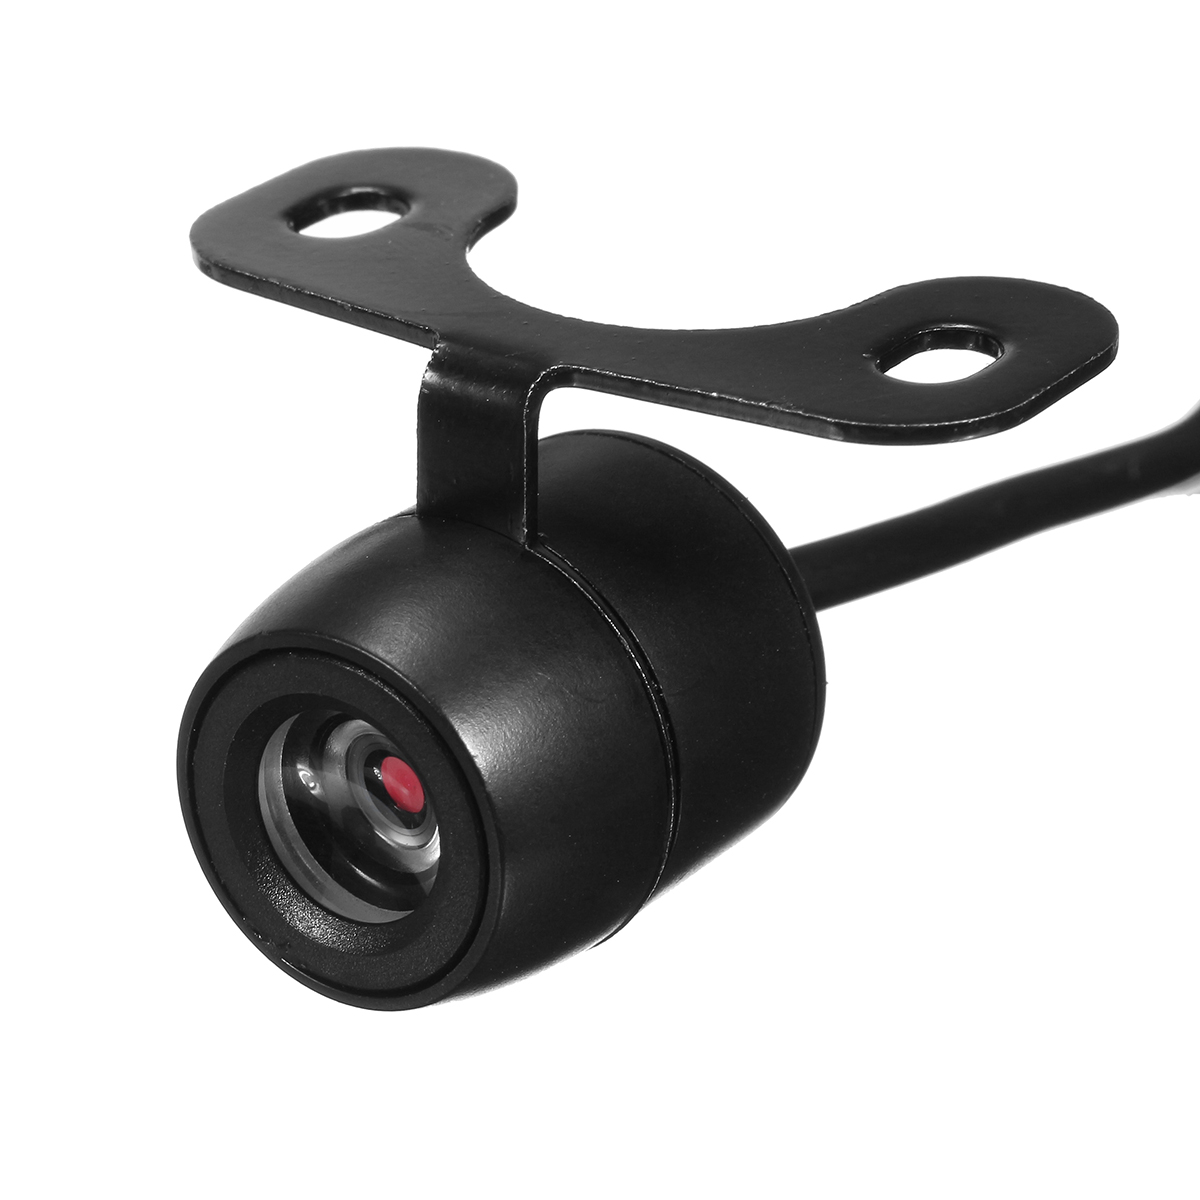 1080P-170-Degrees-Wide-Angle-Rearview-Mirror-Car-DVR-Camera-1375594